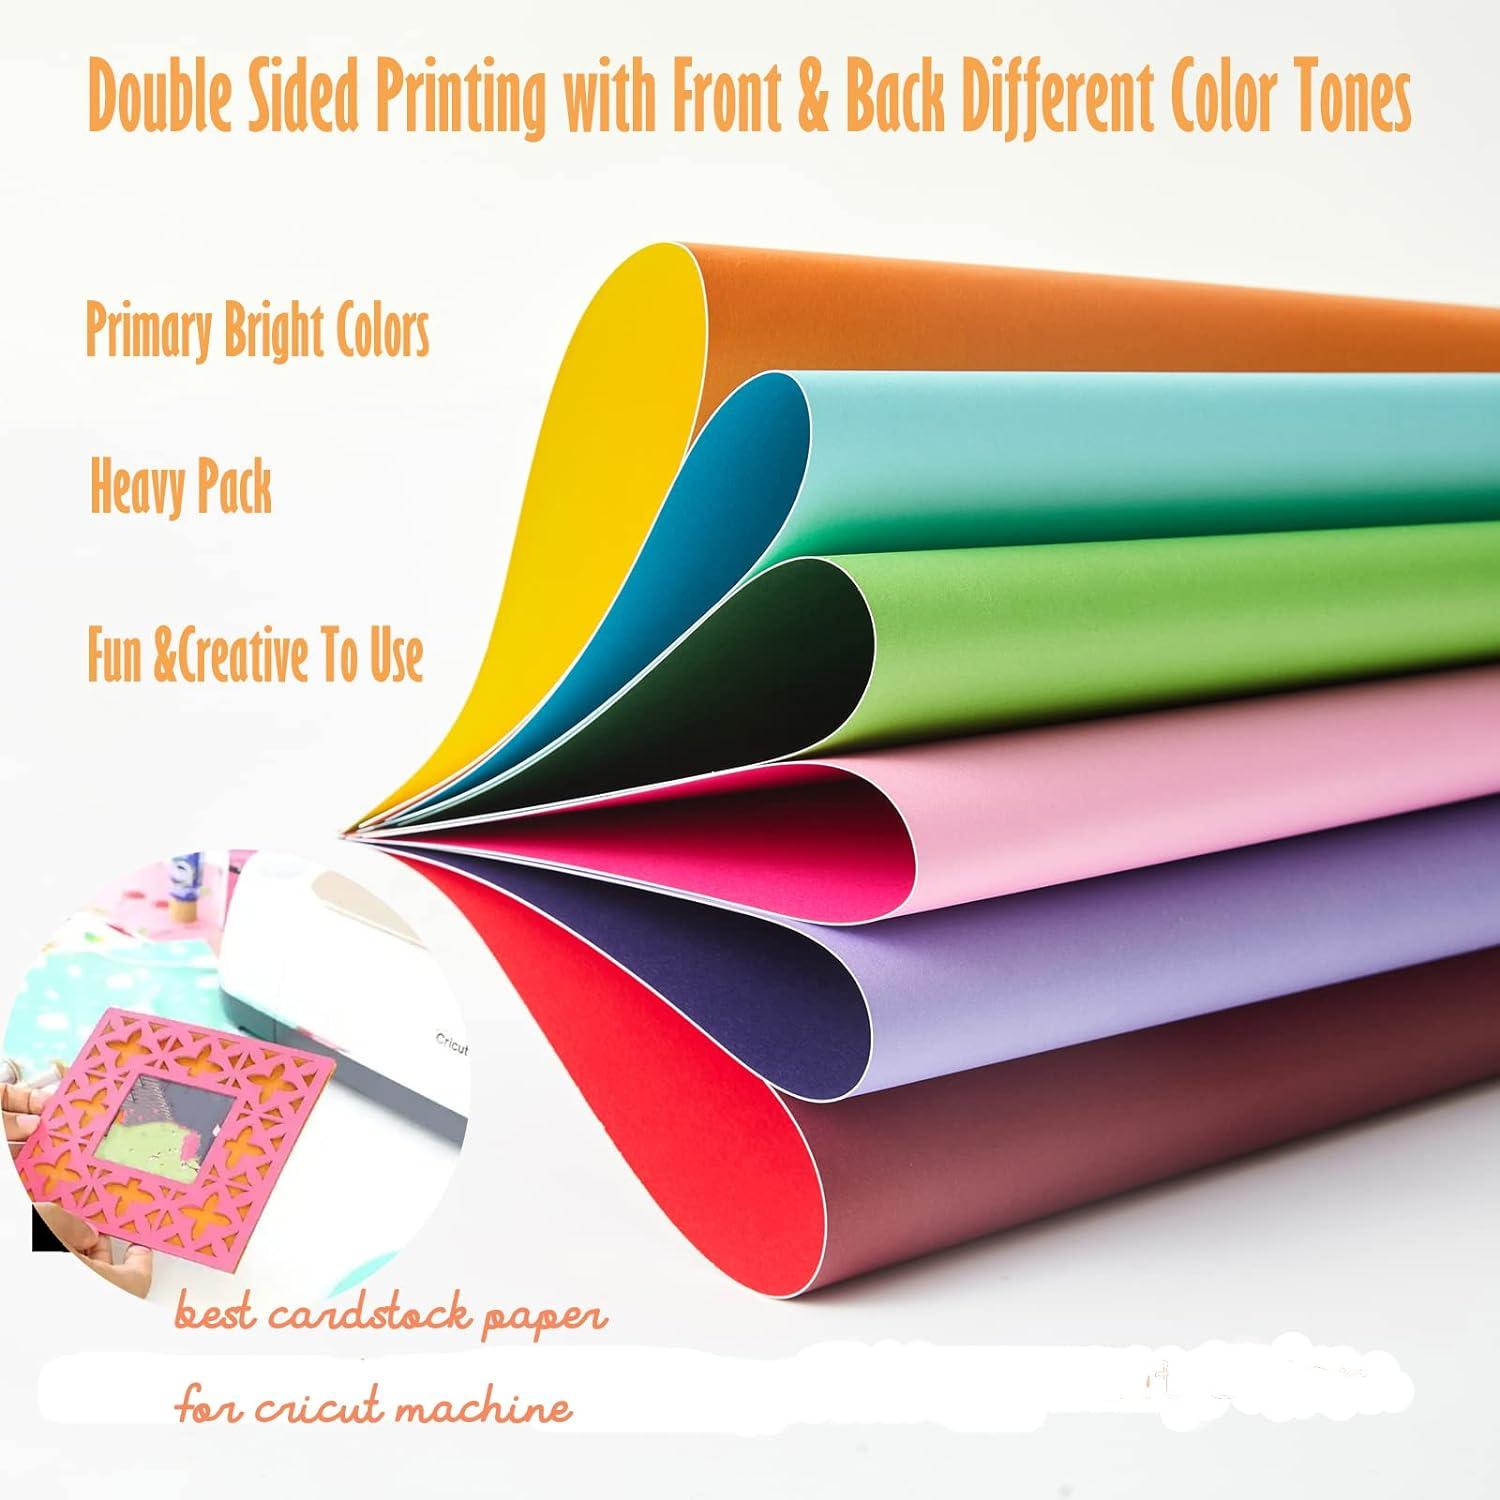 Assorted Pastel Cardstock Paper Pack 8.5x11, 50 sheets